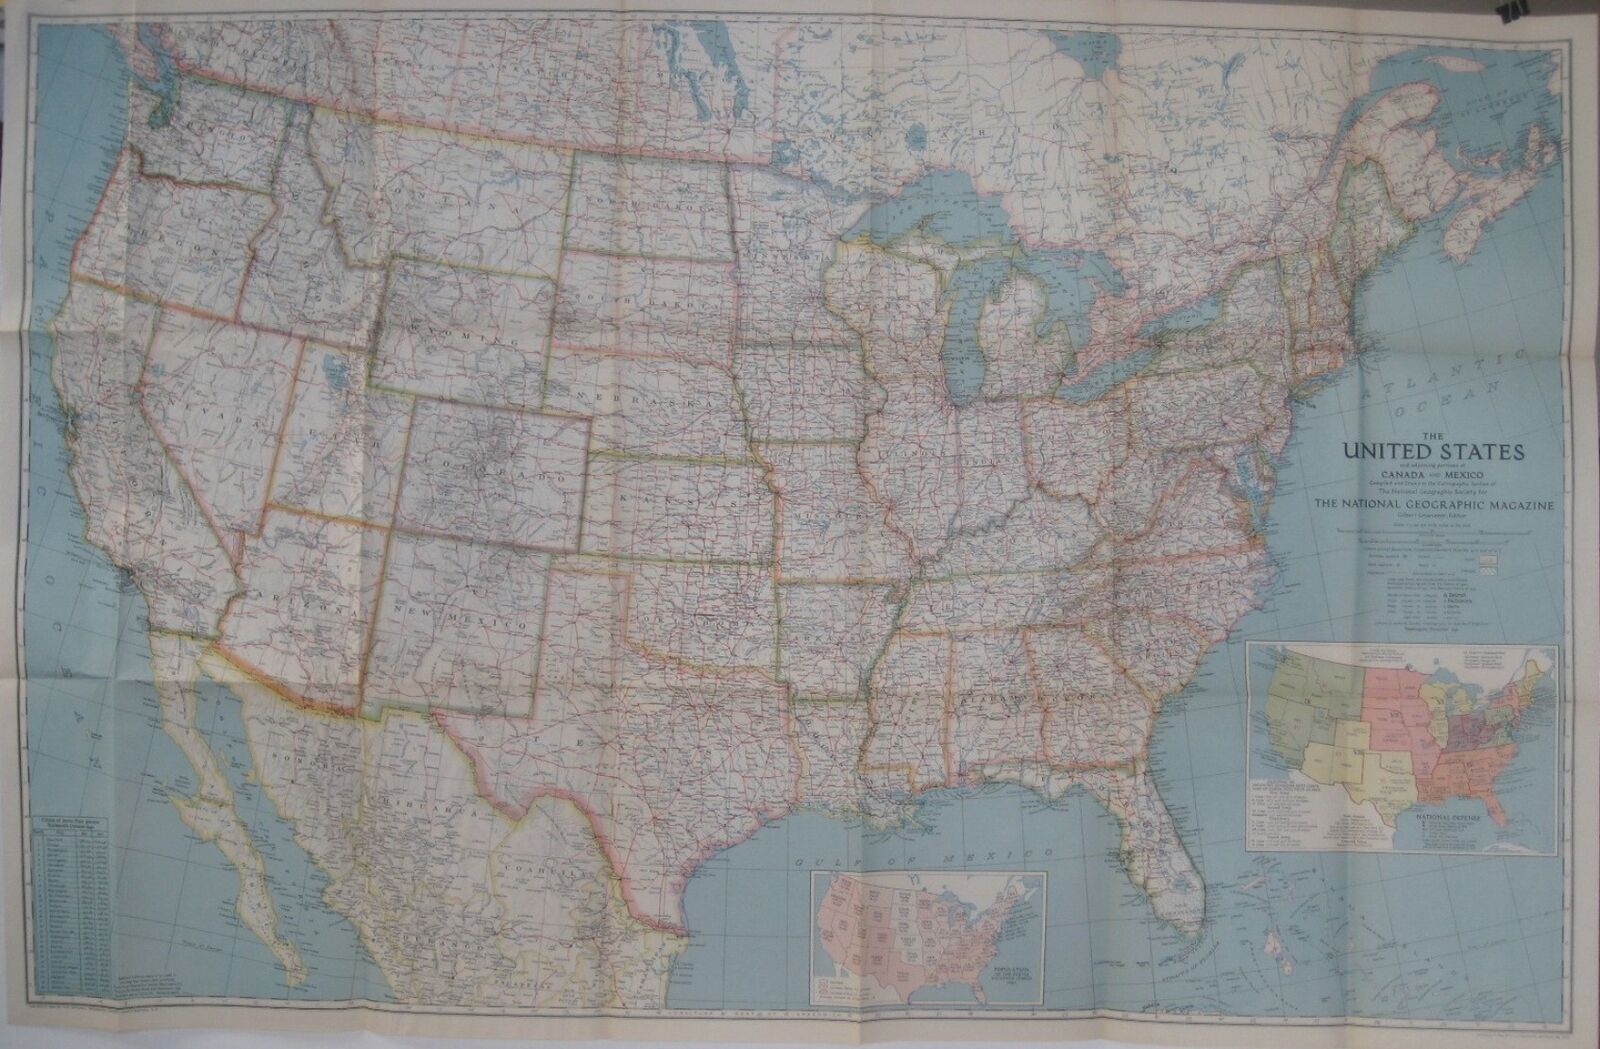 Large-Format 1940 Road Map UNITED STATES Route 66 Army Posts Texas Florida Color